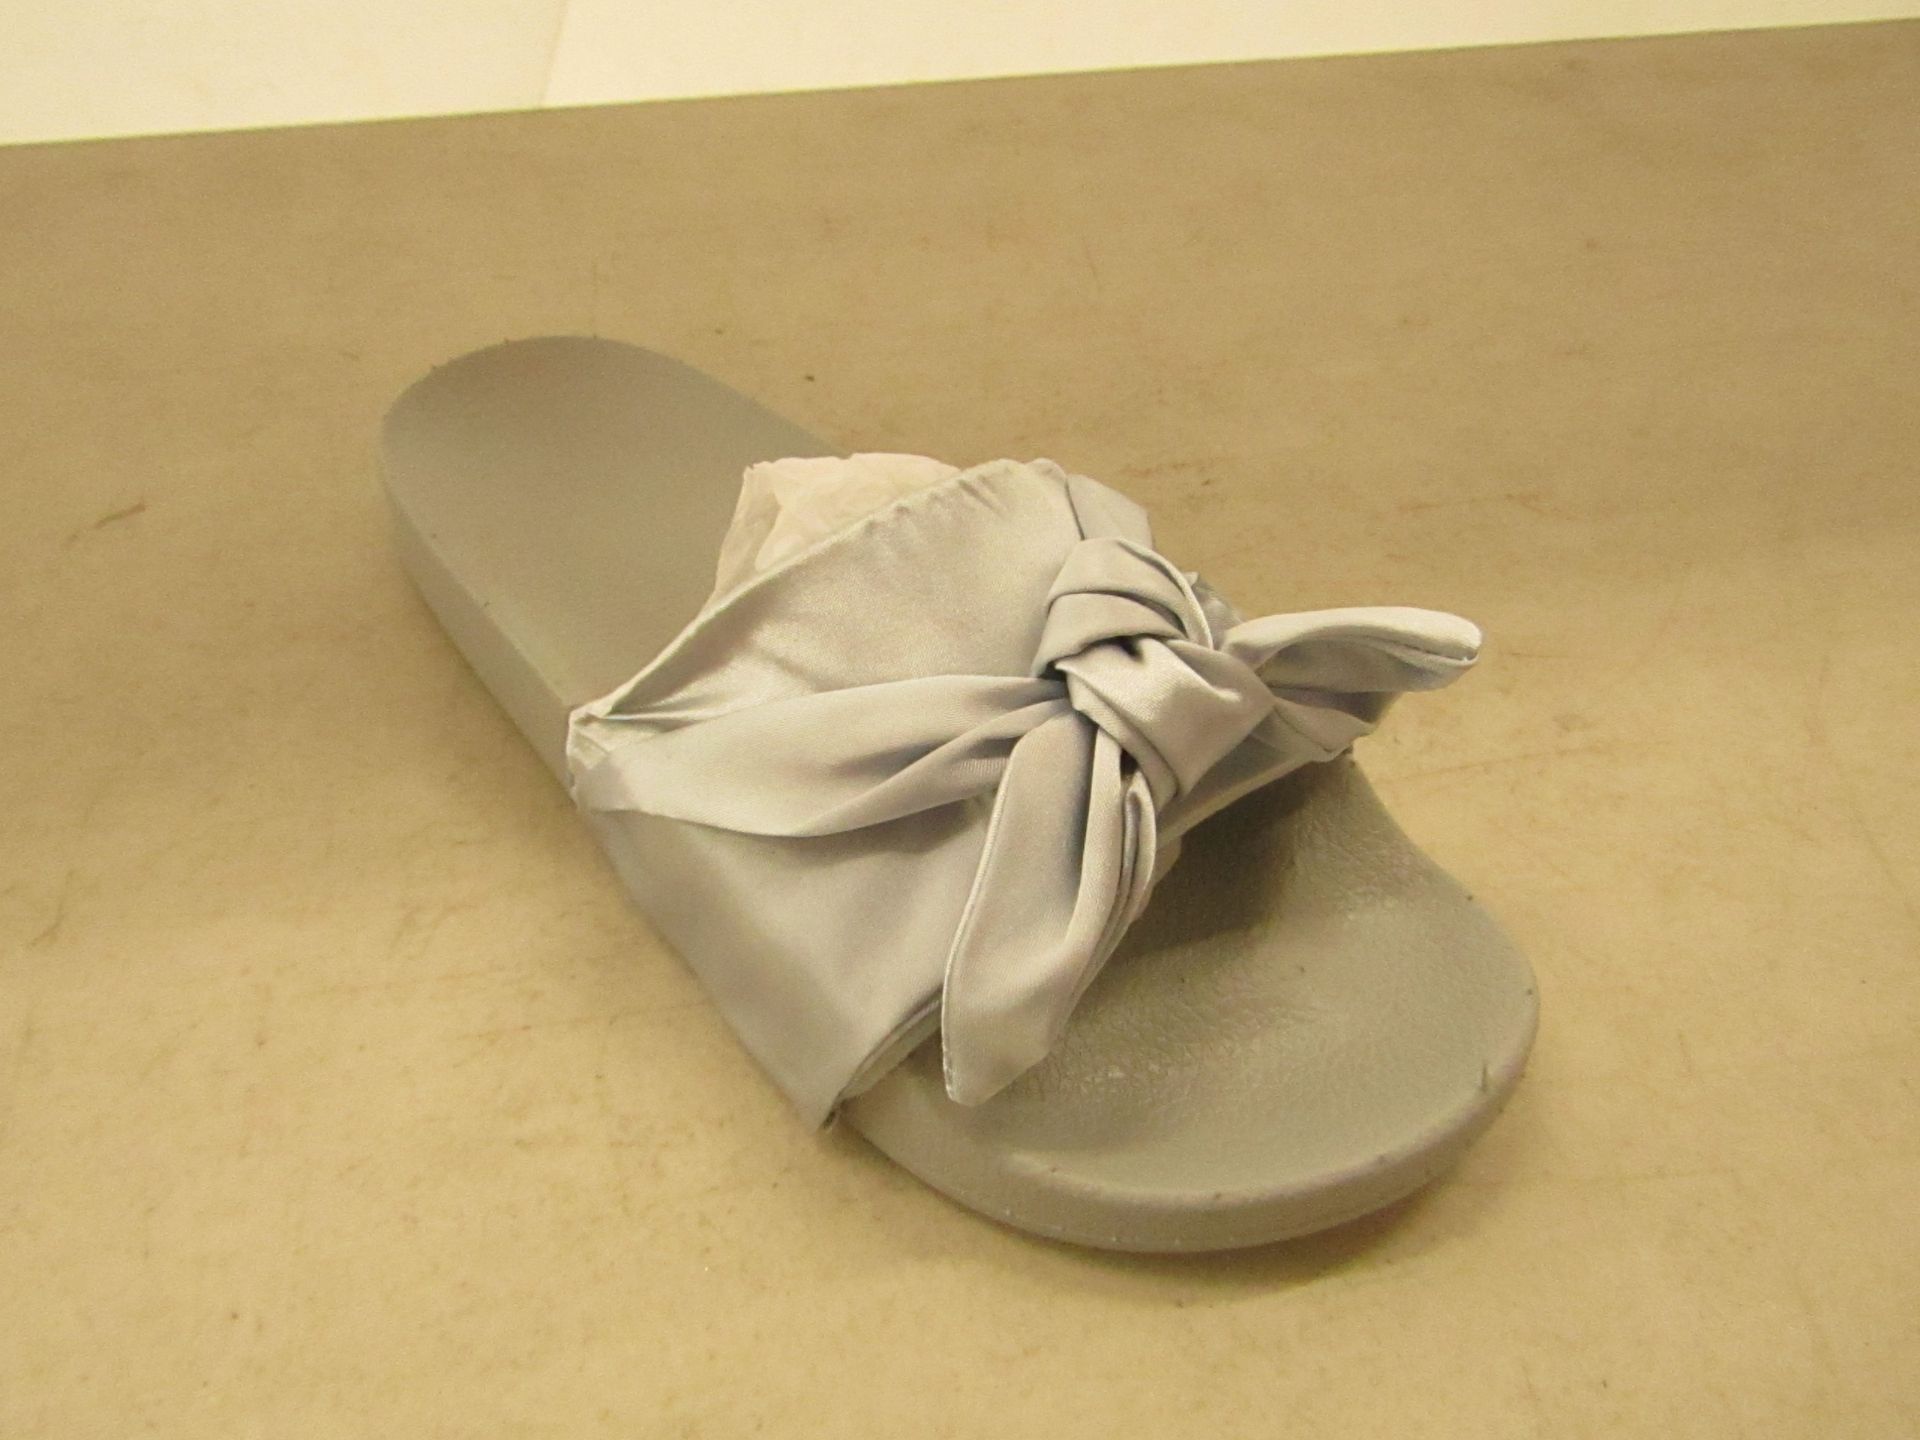 Lady's grey coloured flip flops, size 5, new and packaged.